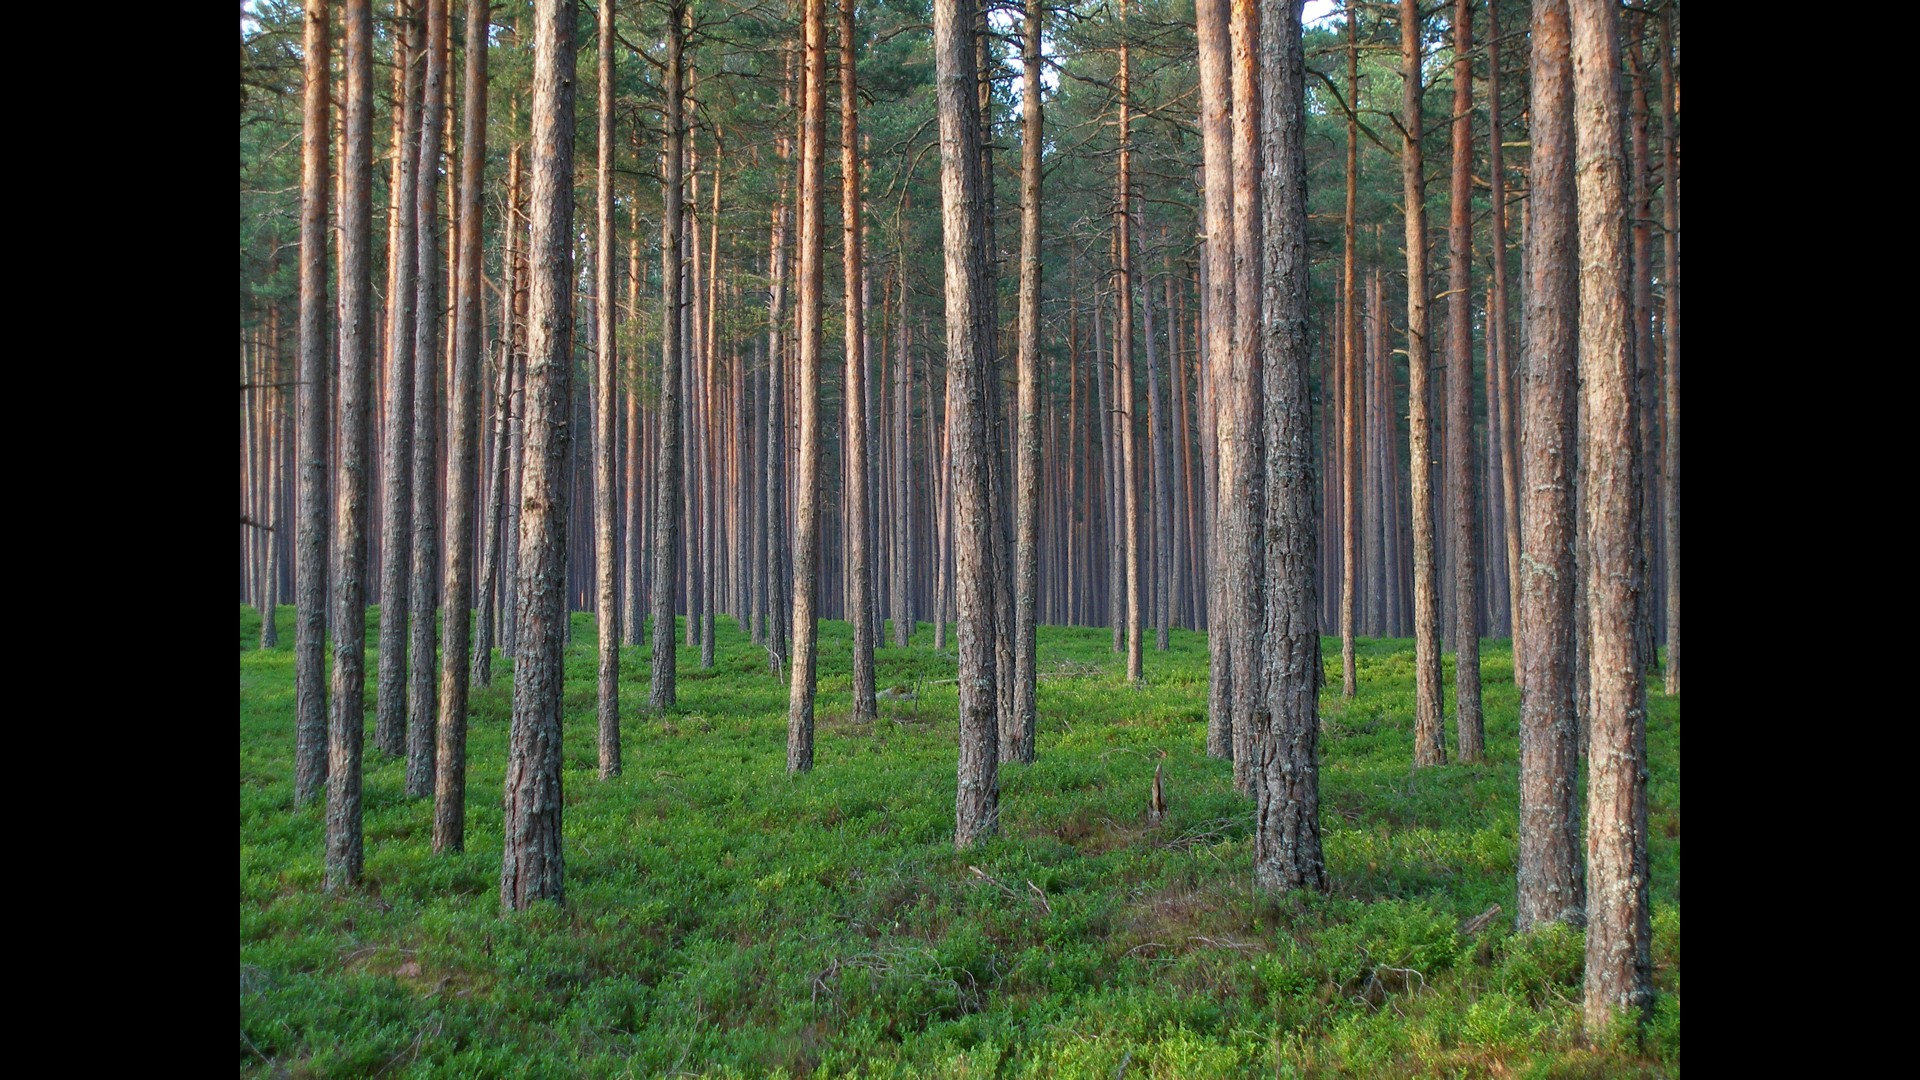 A forest filled with no leafy trees that are separated from each other in uniform distances.